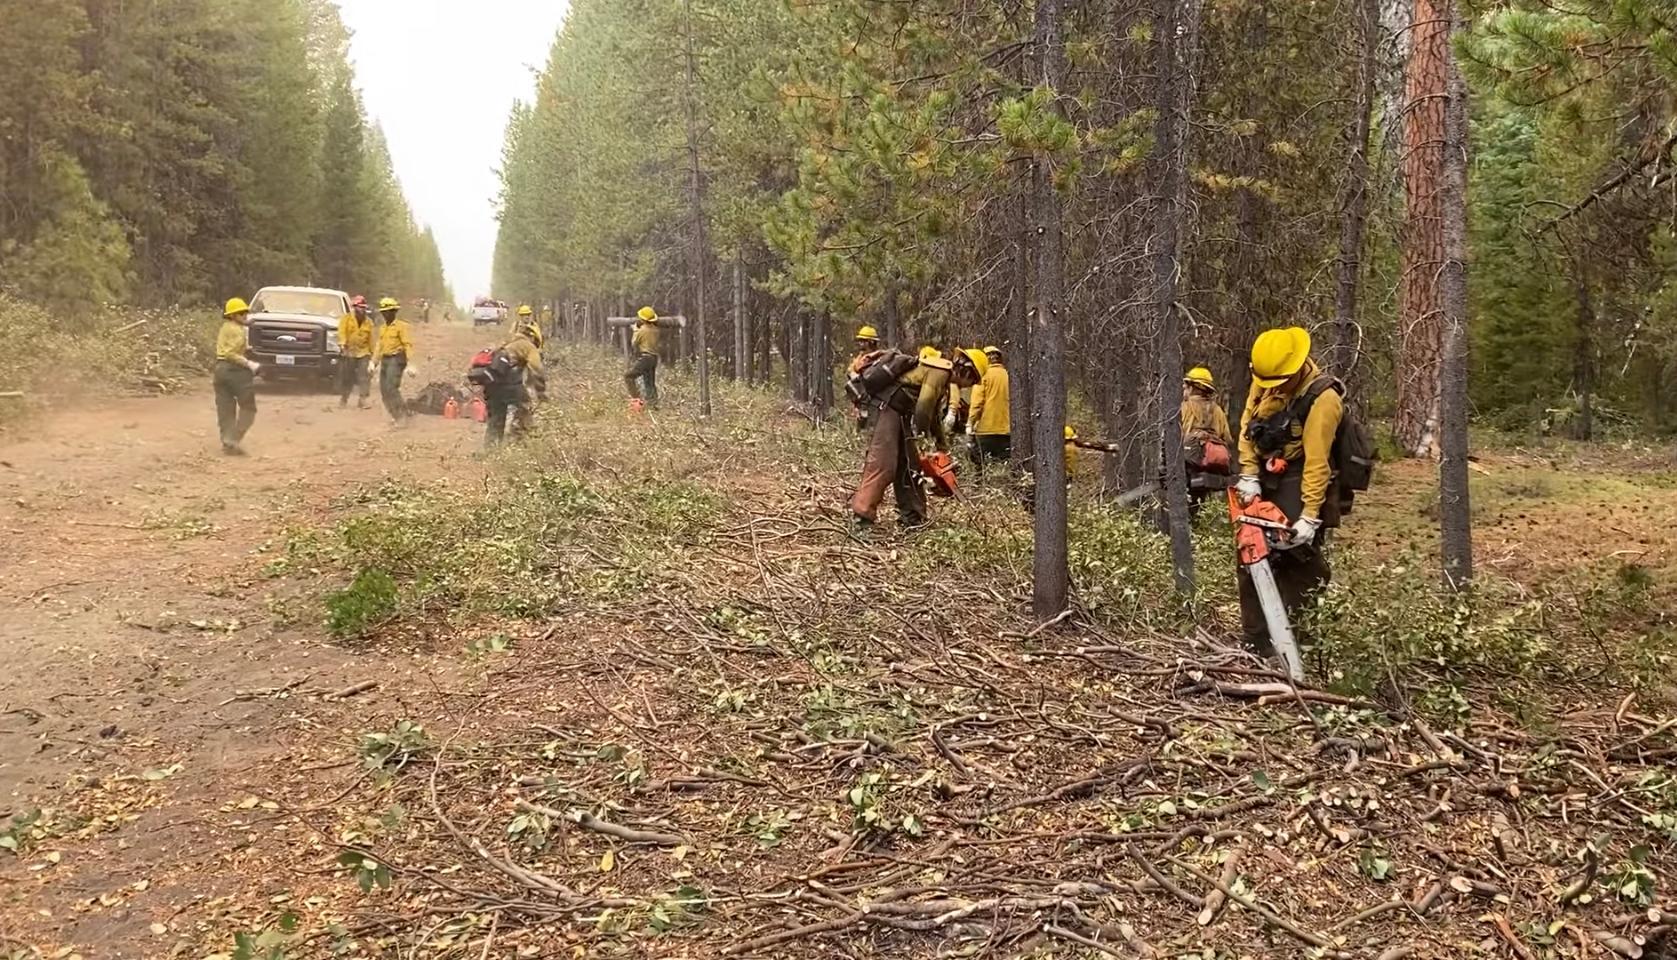 A wildland fire crew dressed in yellow shirts and green pants with yellow hardhats uses chainsaws to thin the roadside area.